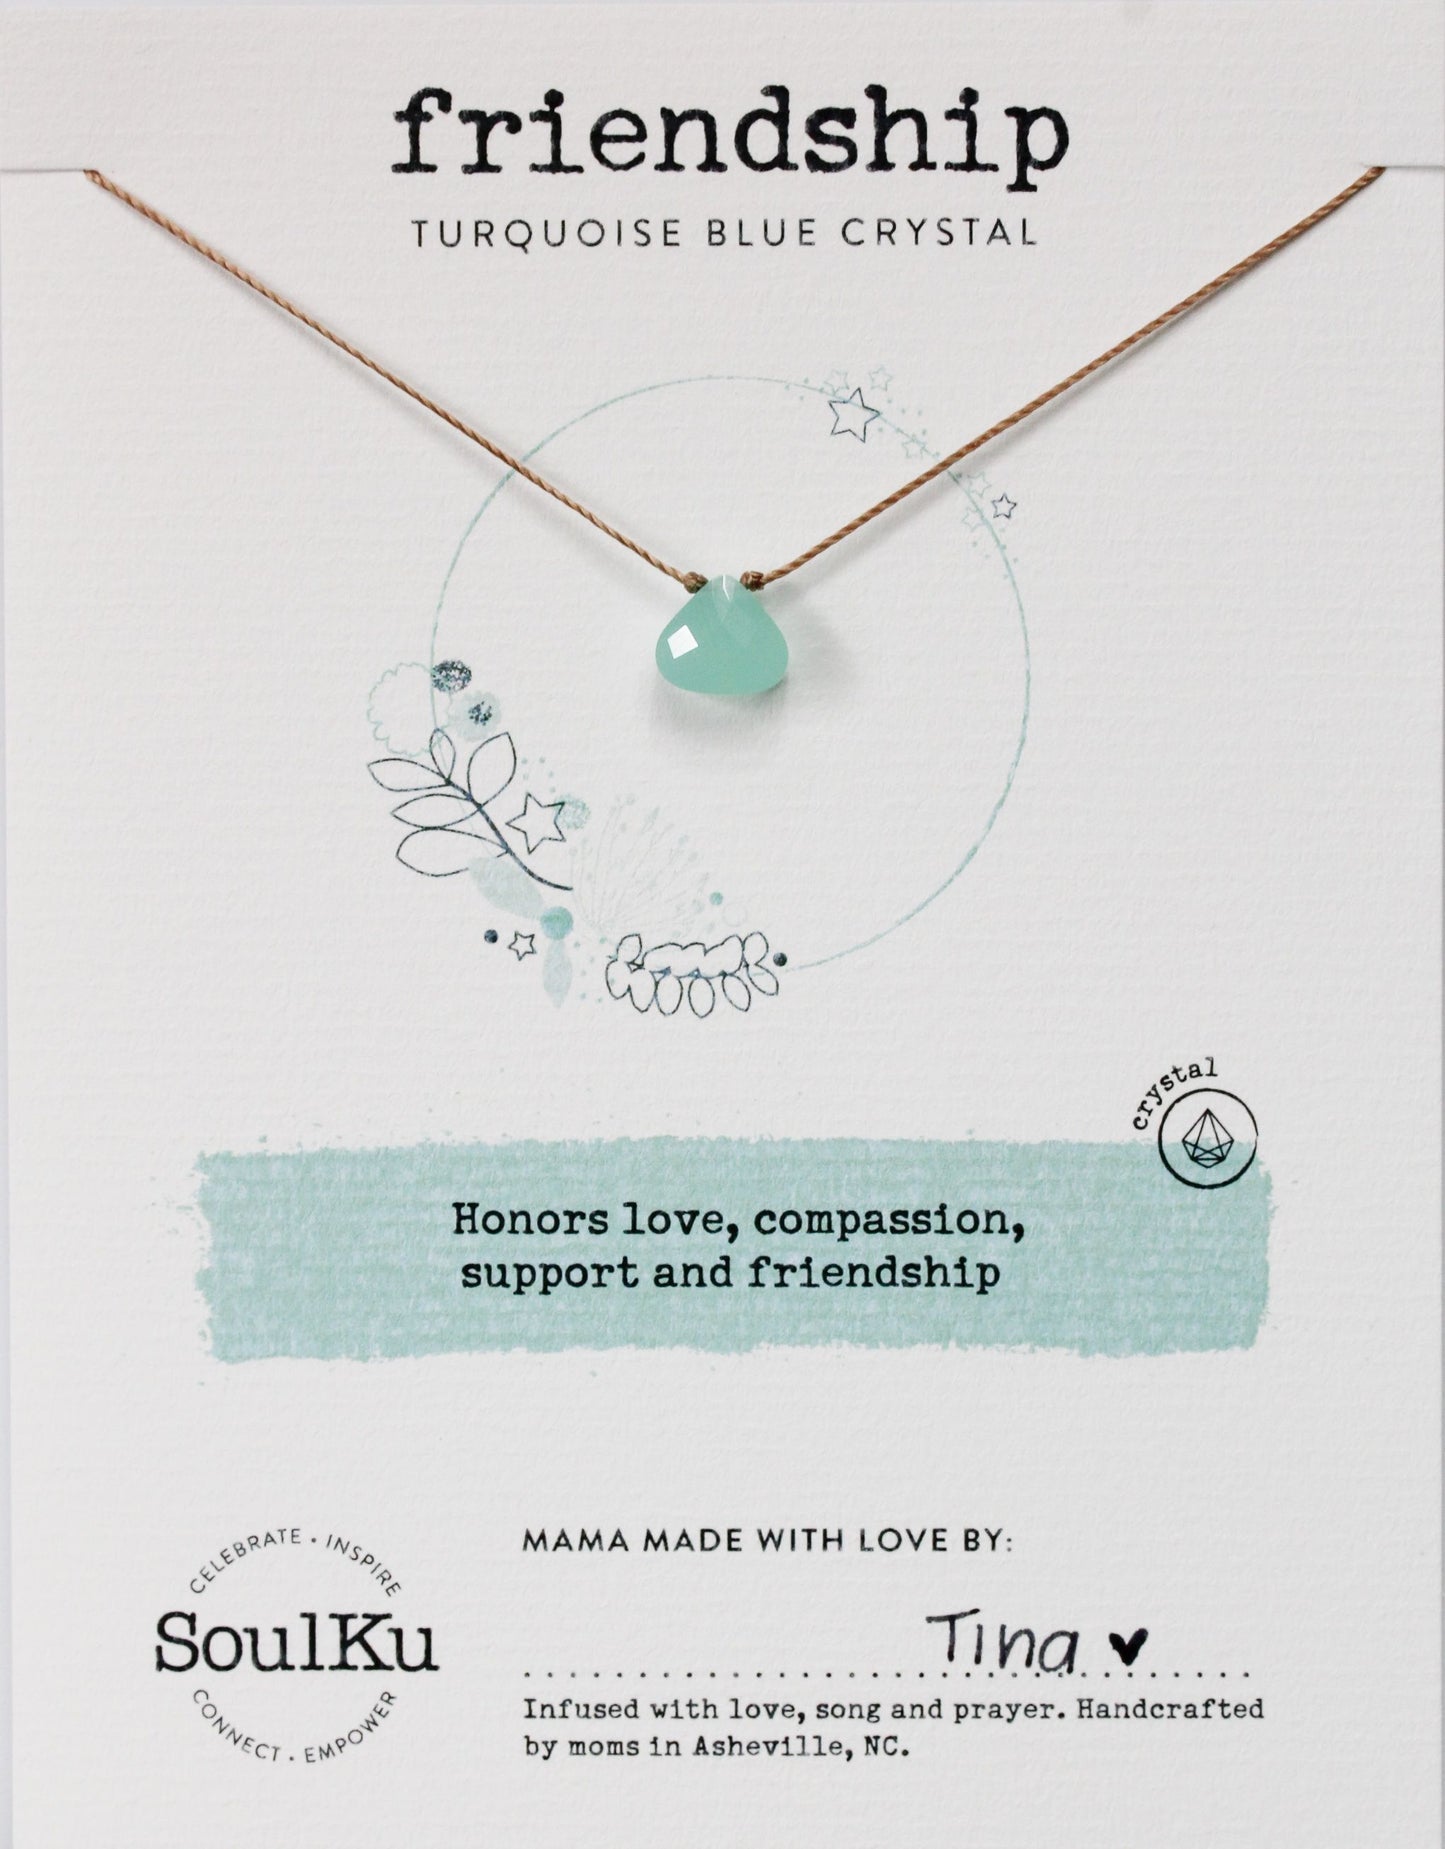 Turquoise Blue Crystal Soulku Soul Shine Teardrop Necklace adjustable nylon cord necklace semi-precious stone birthstone hand made in USA for girls women 